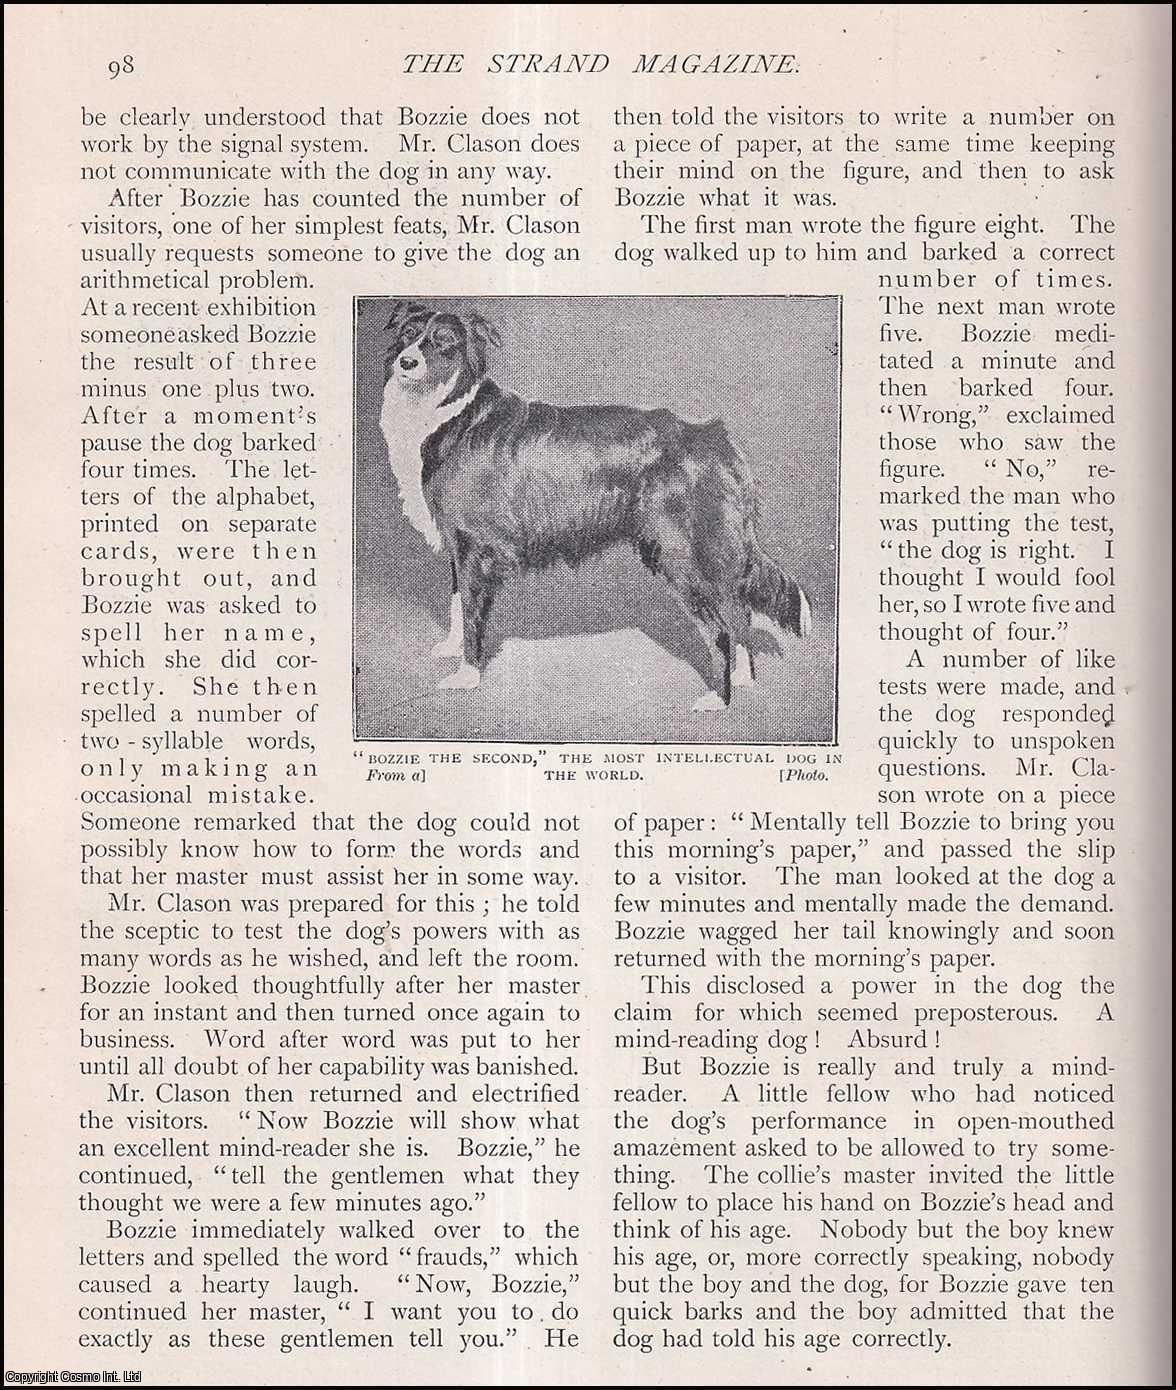 --- - The Most Intellectual Dog In The World. Wonders of The Worlds. A rare original article from The Strand Magazine, 1904.